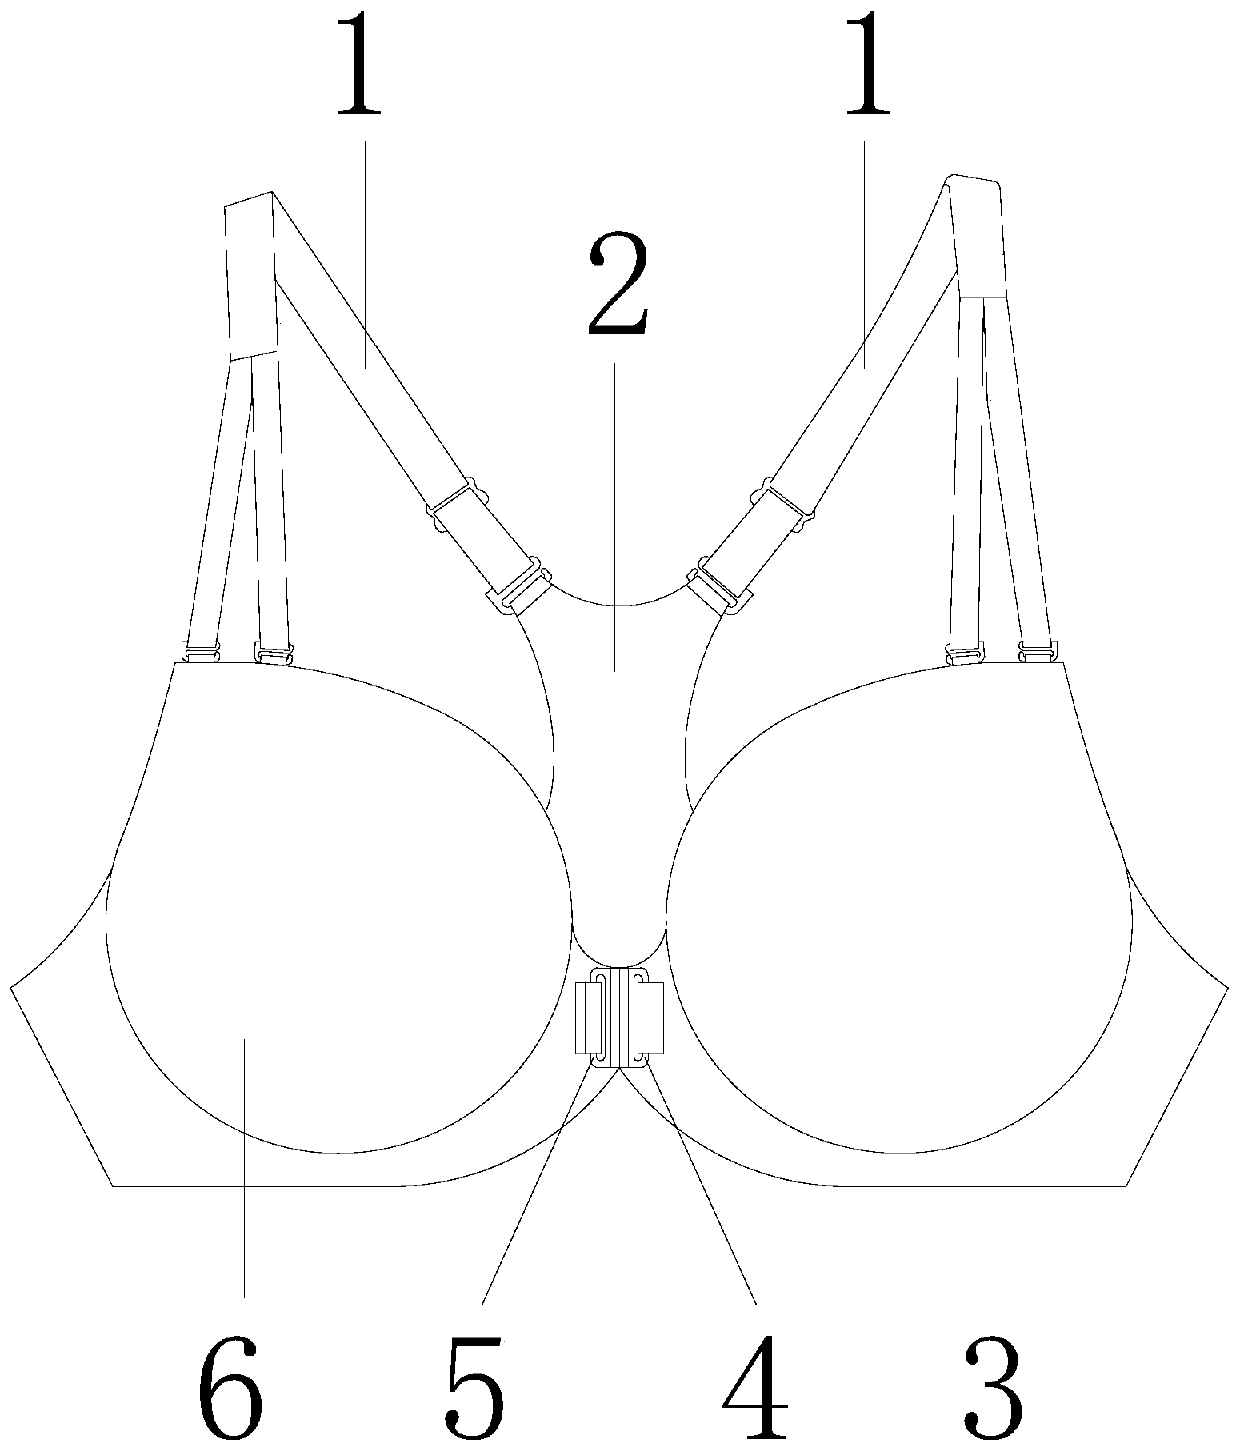 Intelligent bra for preventing nipple retraction by utilizing serial connection of opening and closing